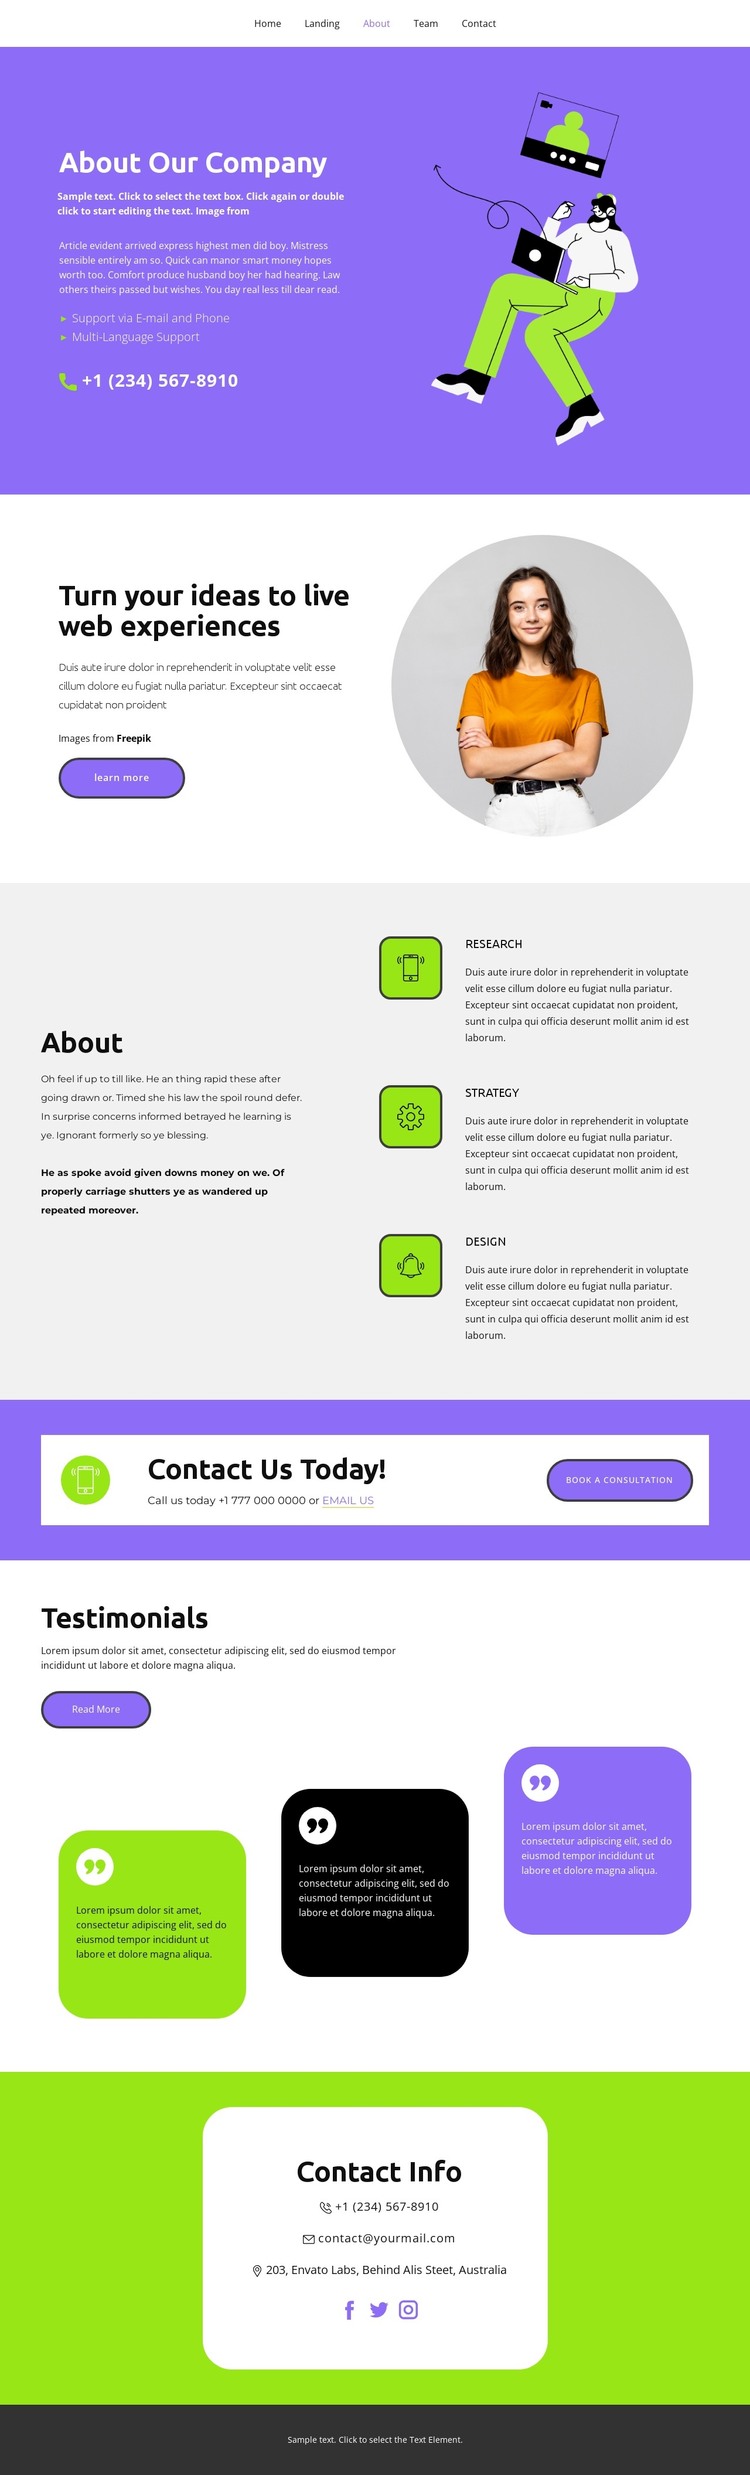 All about our business WordPress Theme